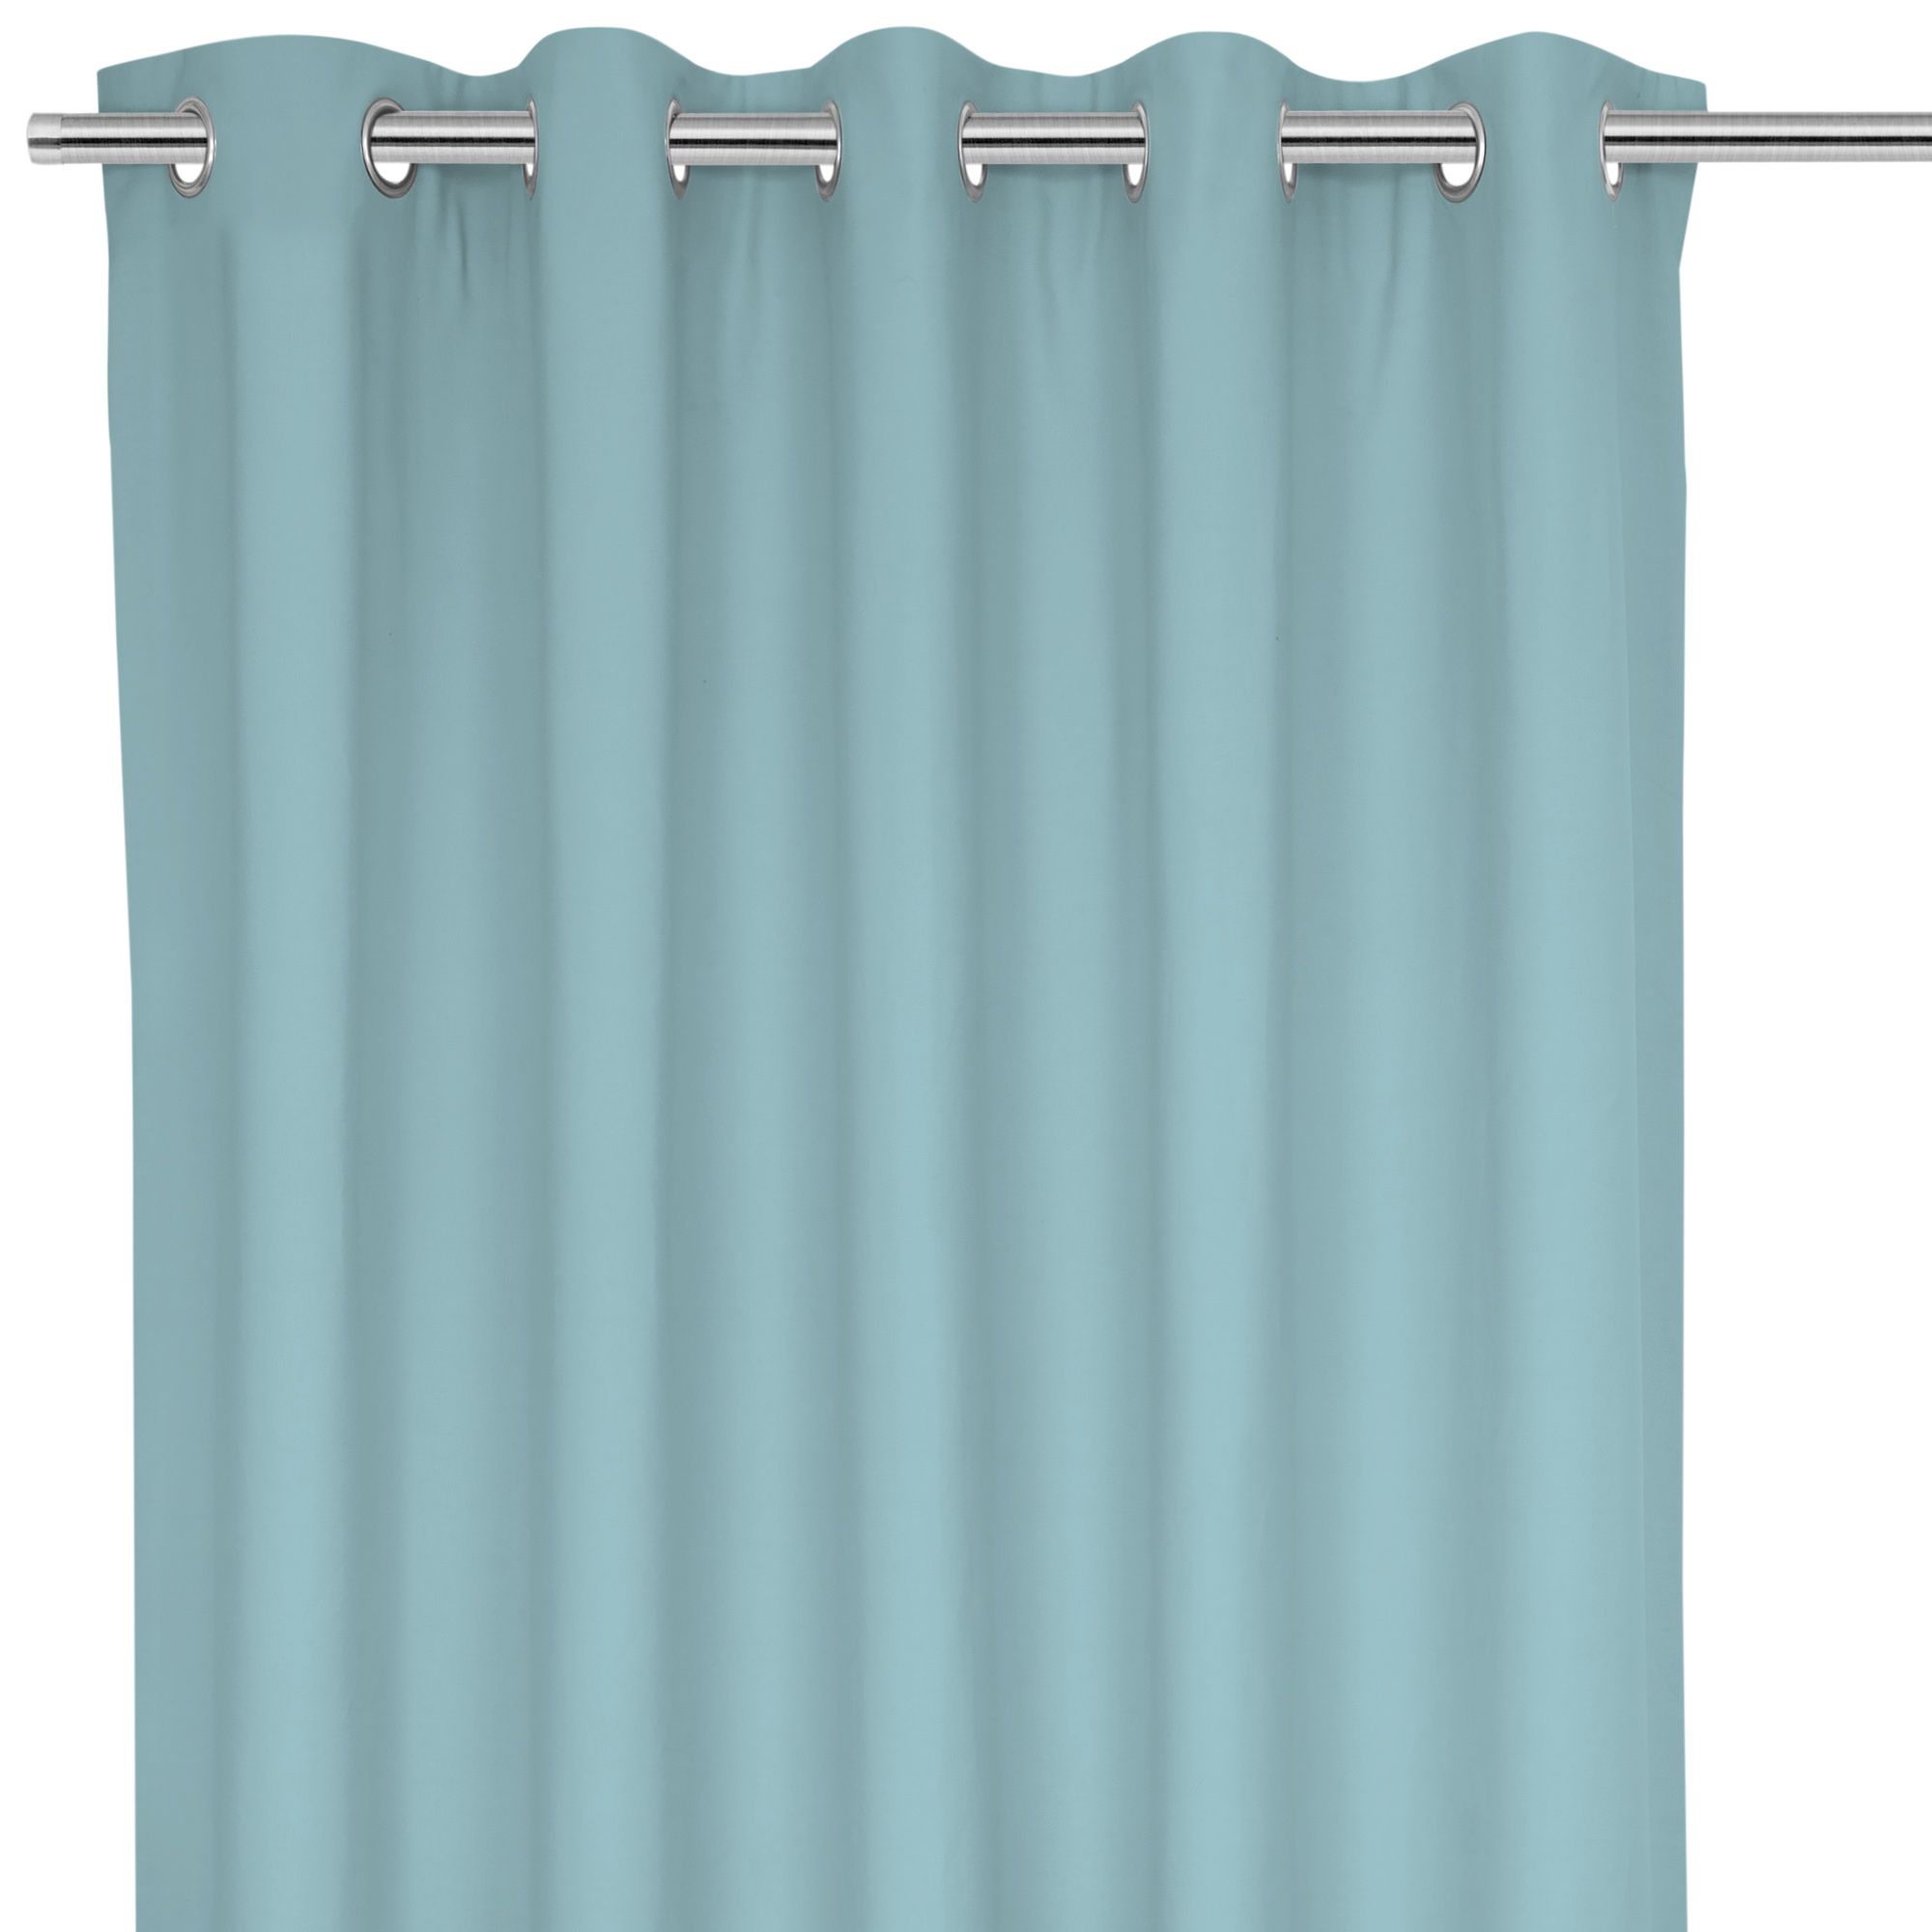 Hiva Light blue Solid dyed Lined Eyelet Curtain (W)167cm (L)228cm, Pair